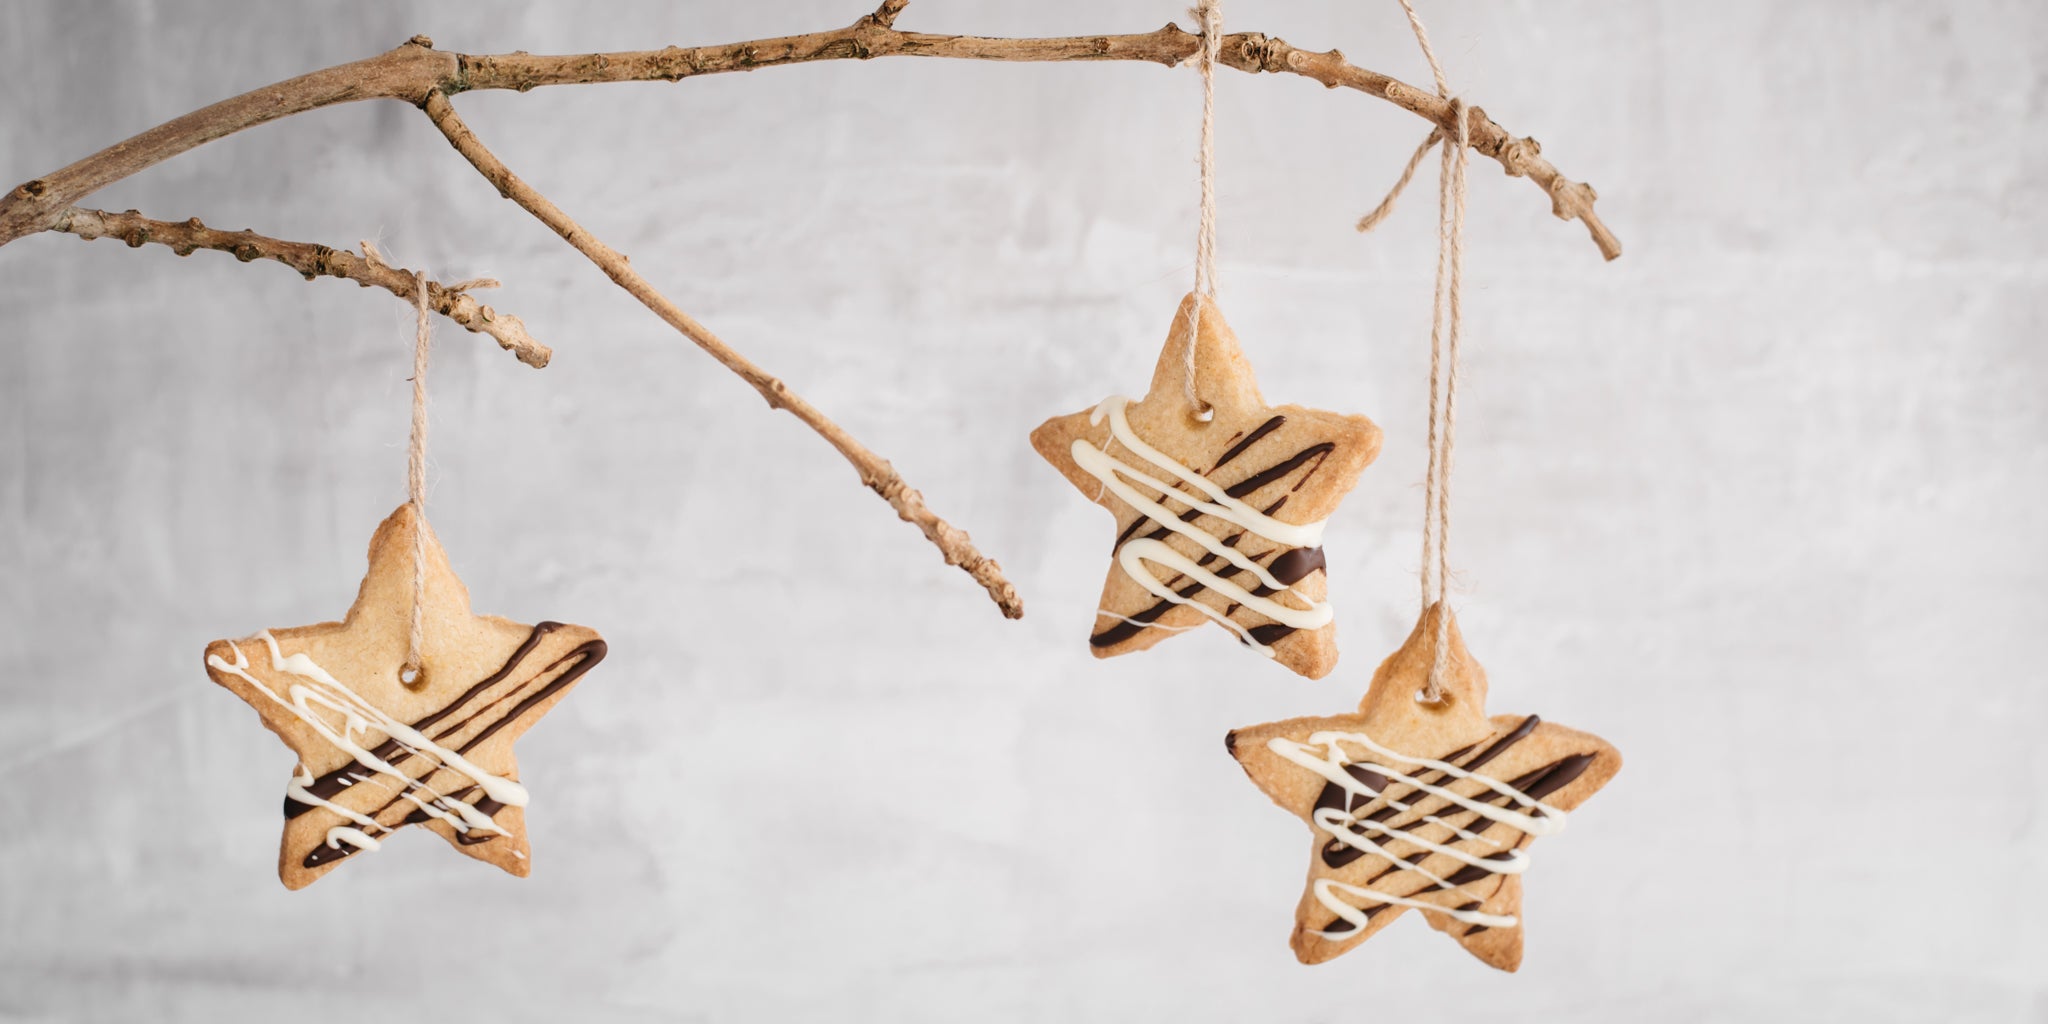 Orange & Ginger shortbread stars hanging from a branch with twine threaded through them.